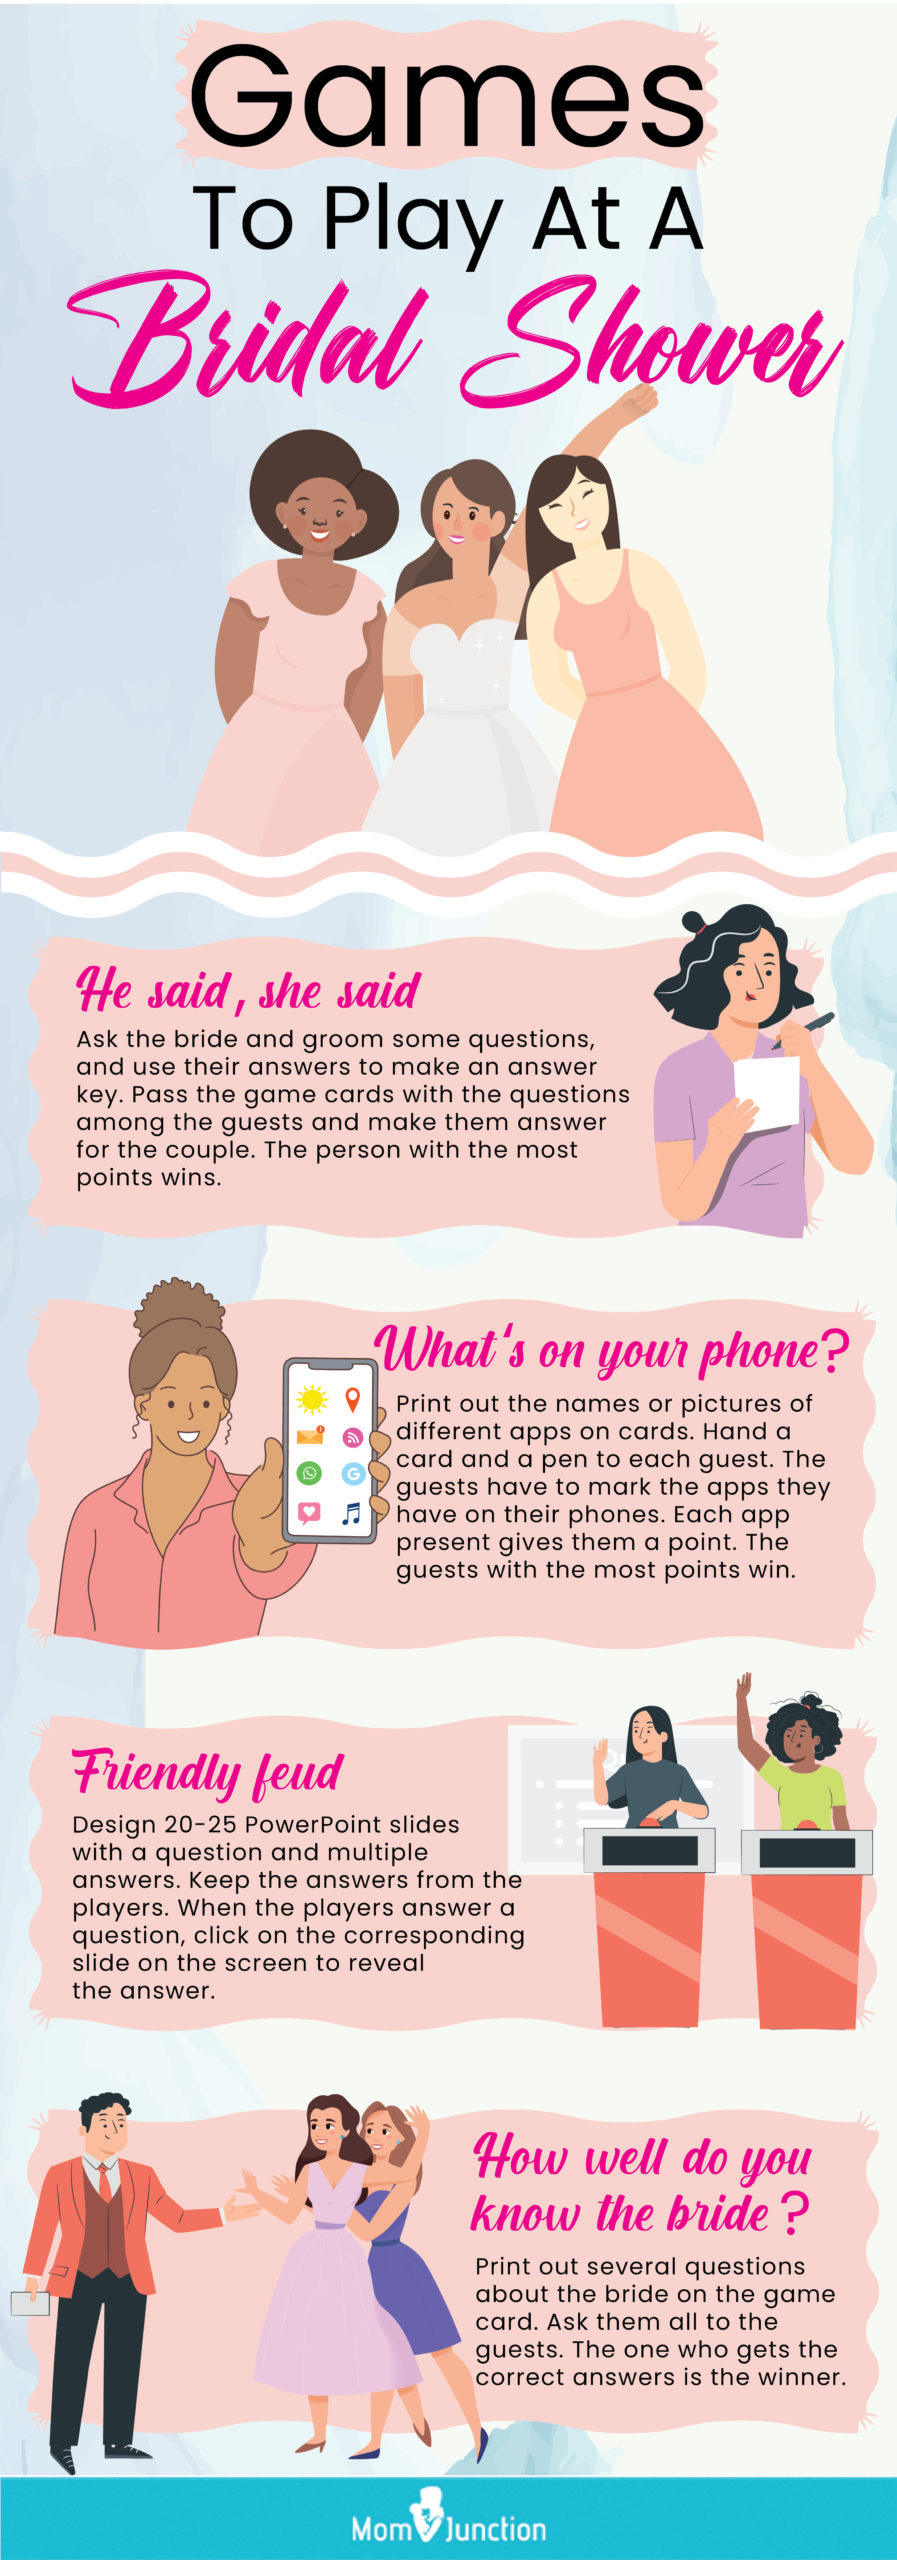 games to play at a bridal shower [infographic]